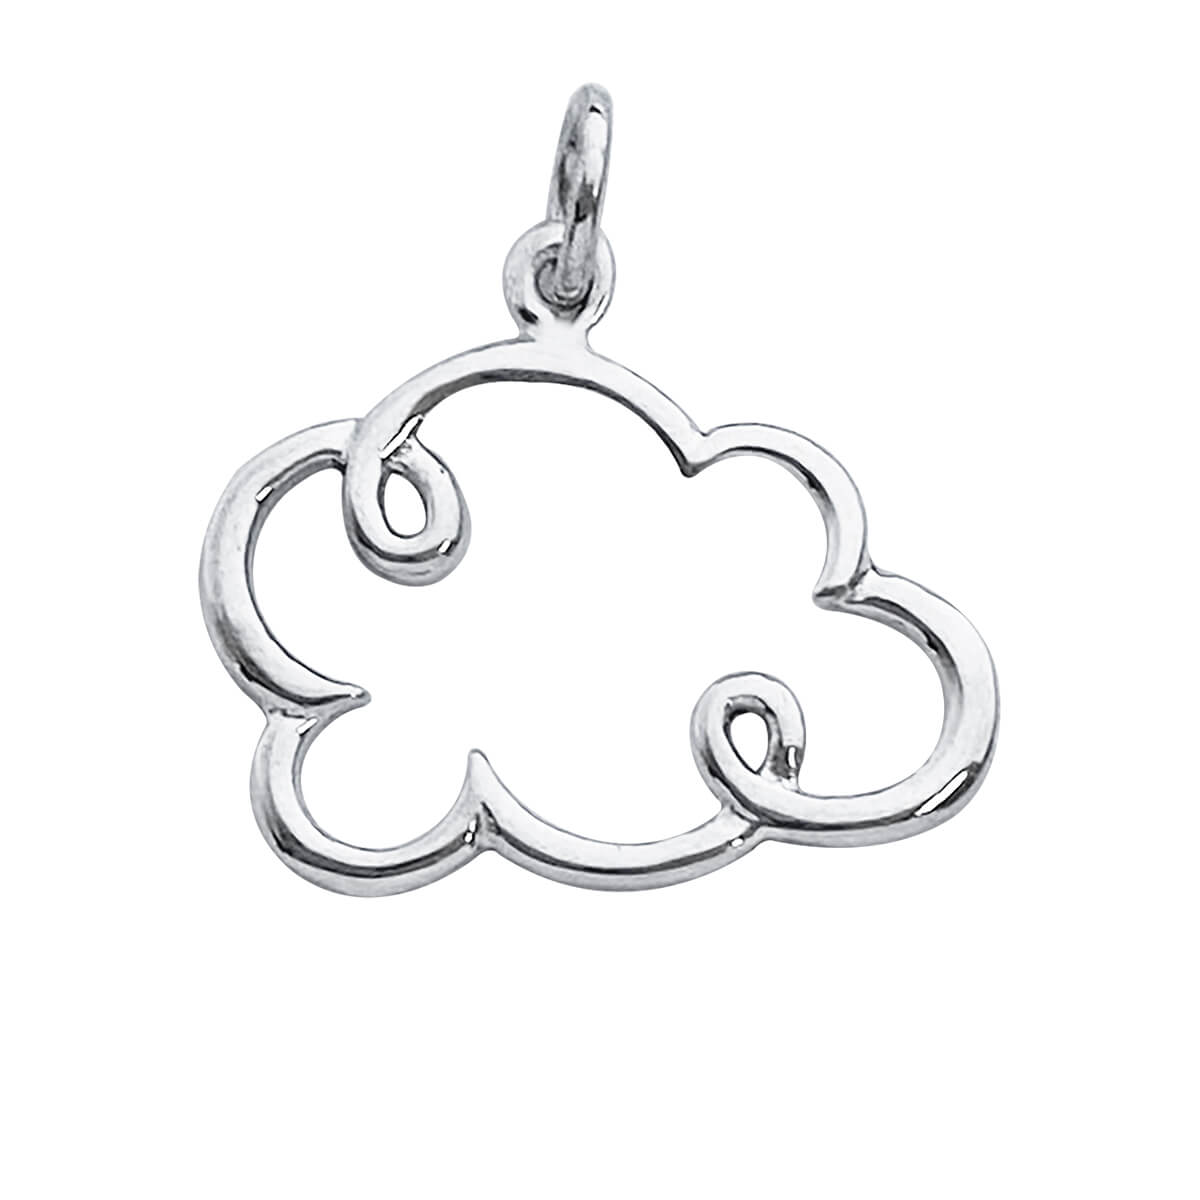 Sterling silver cloud charm from Charmarama Charms